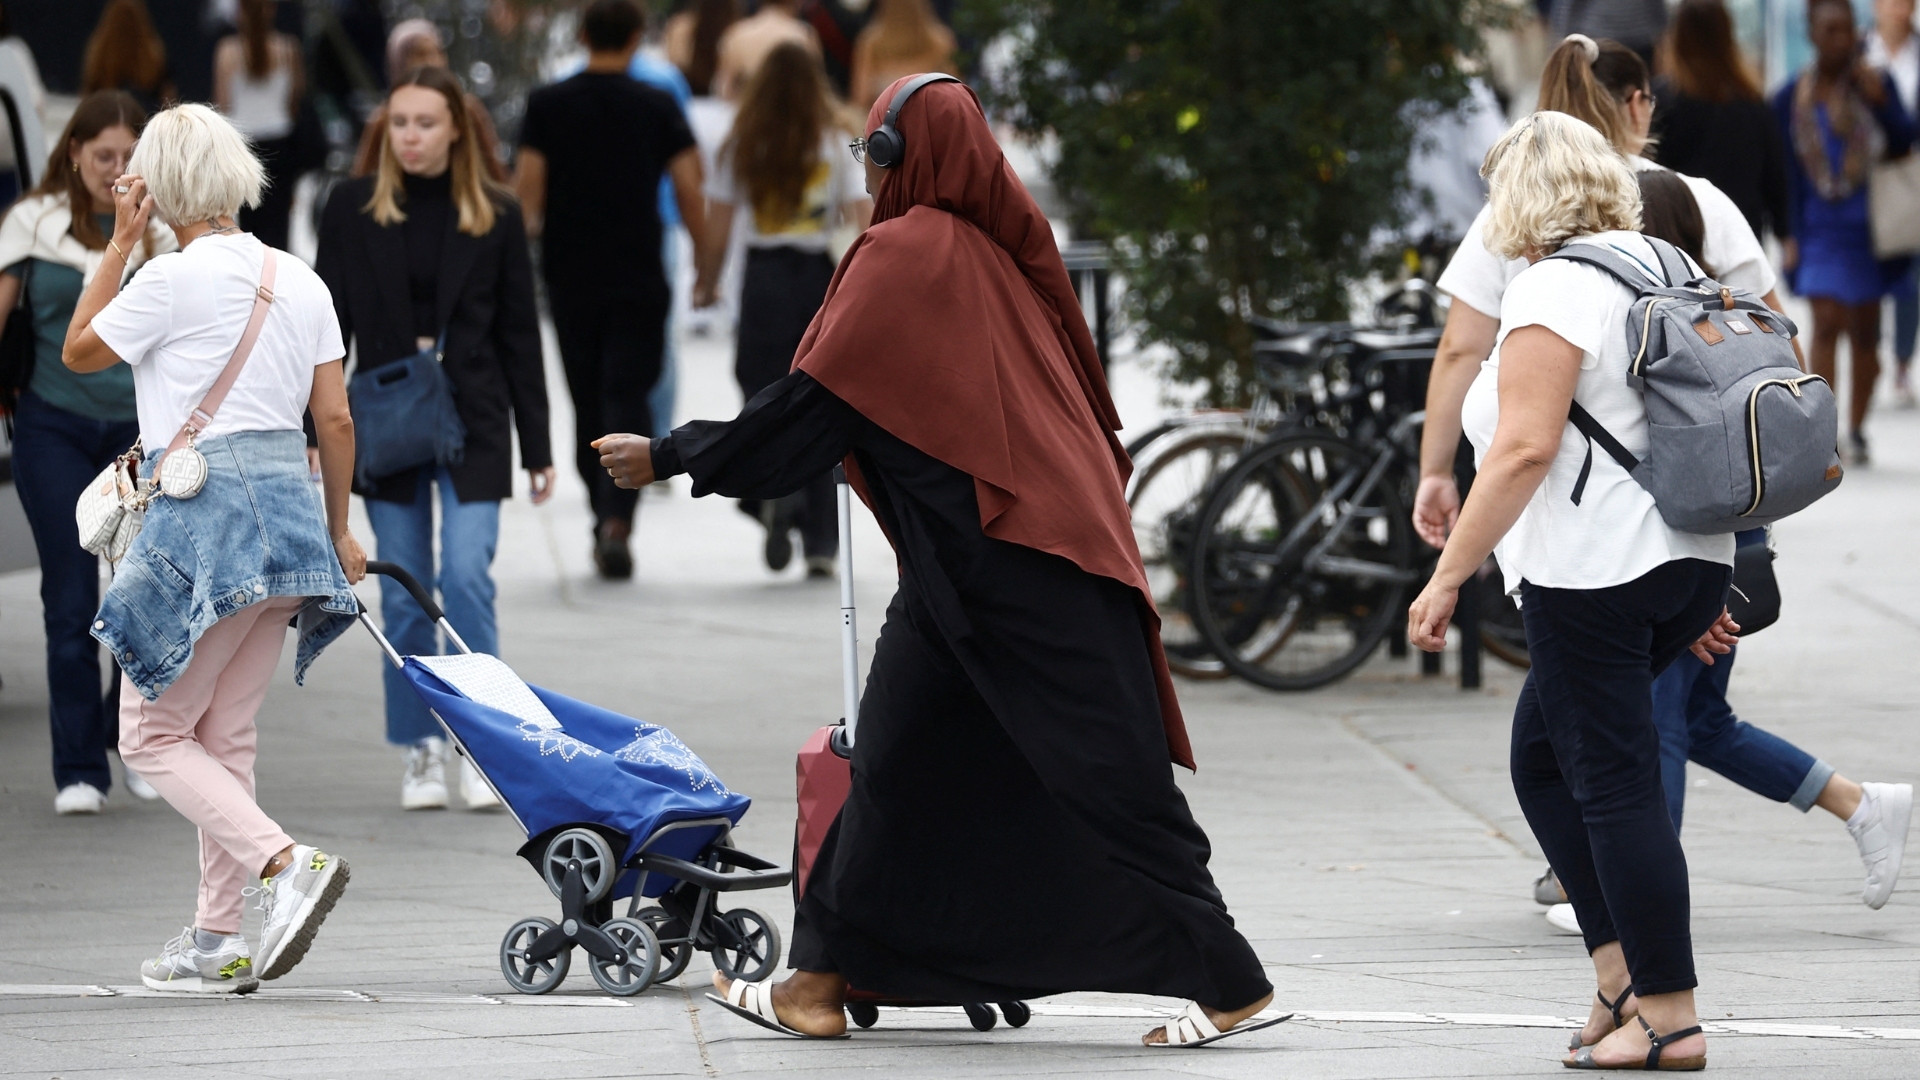 Abaya ban in French public faculties: secularism or discrimination?  |  Faith